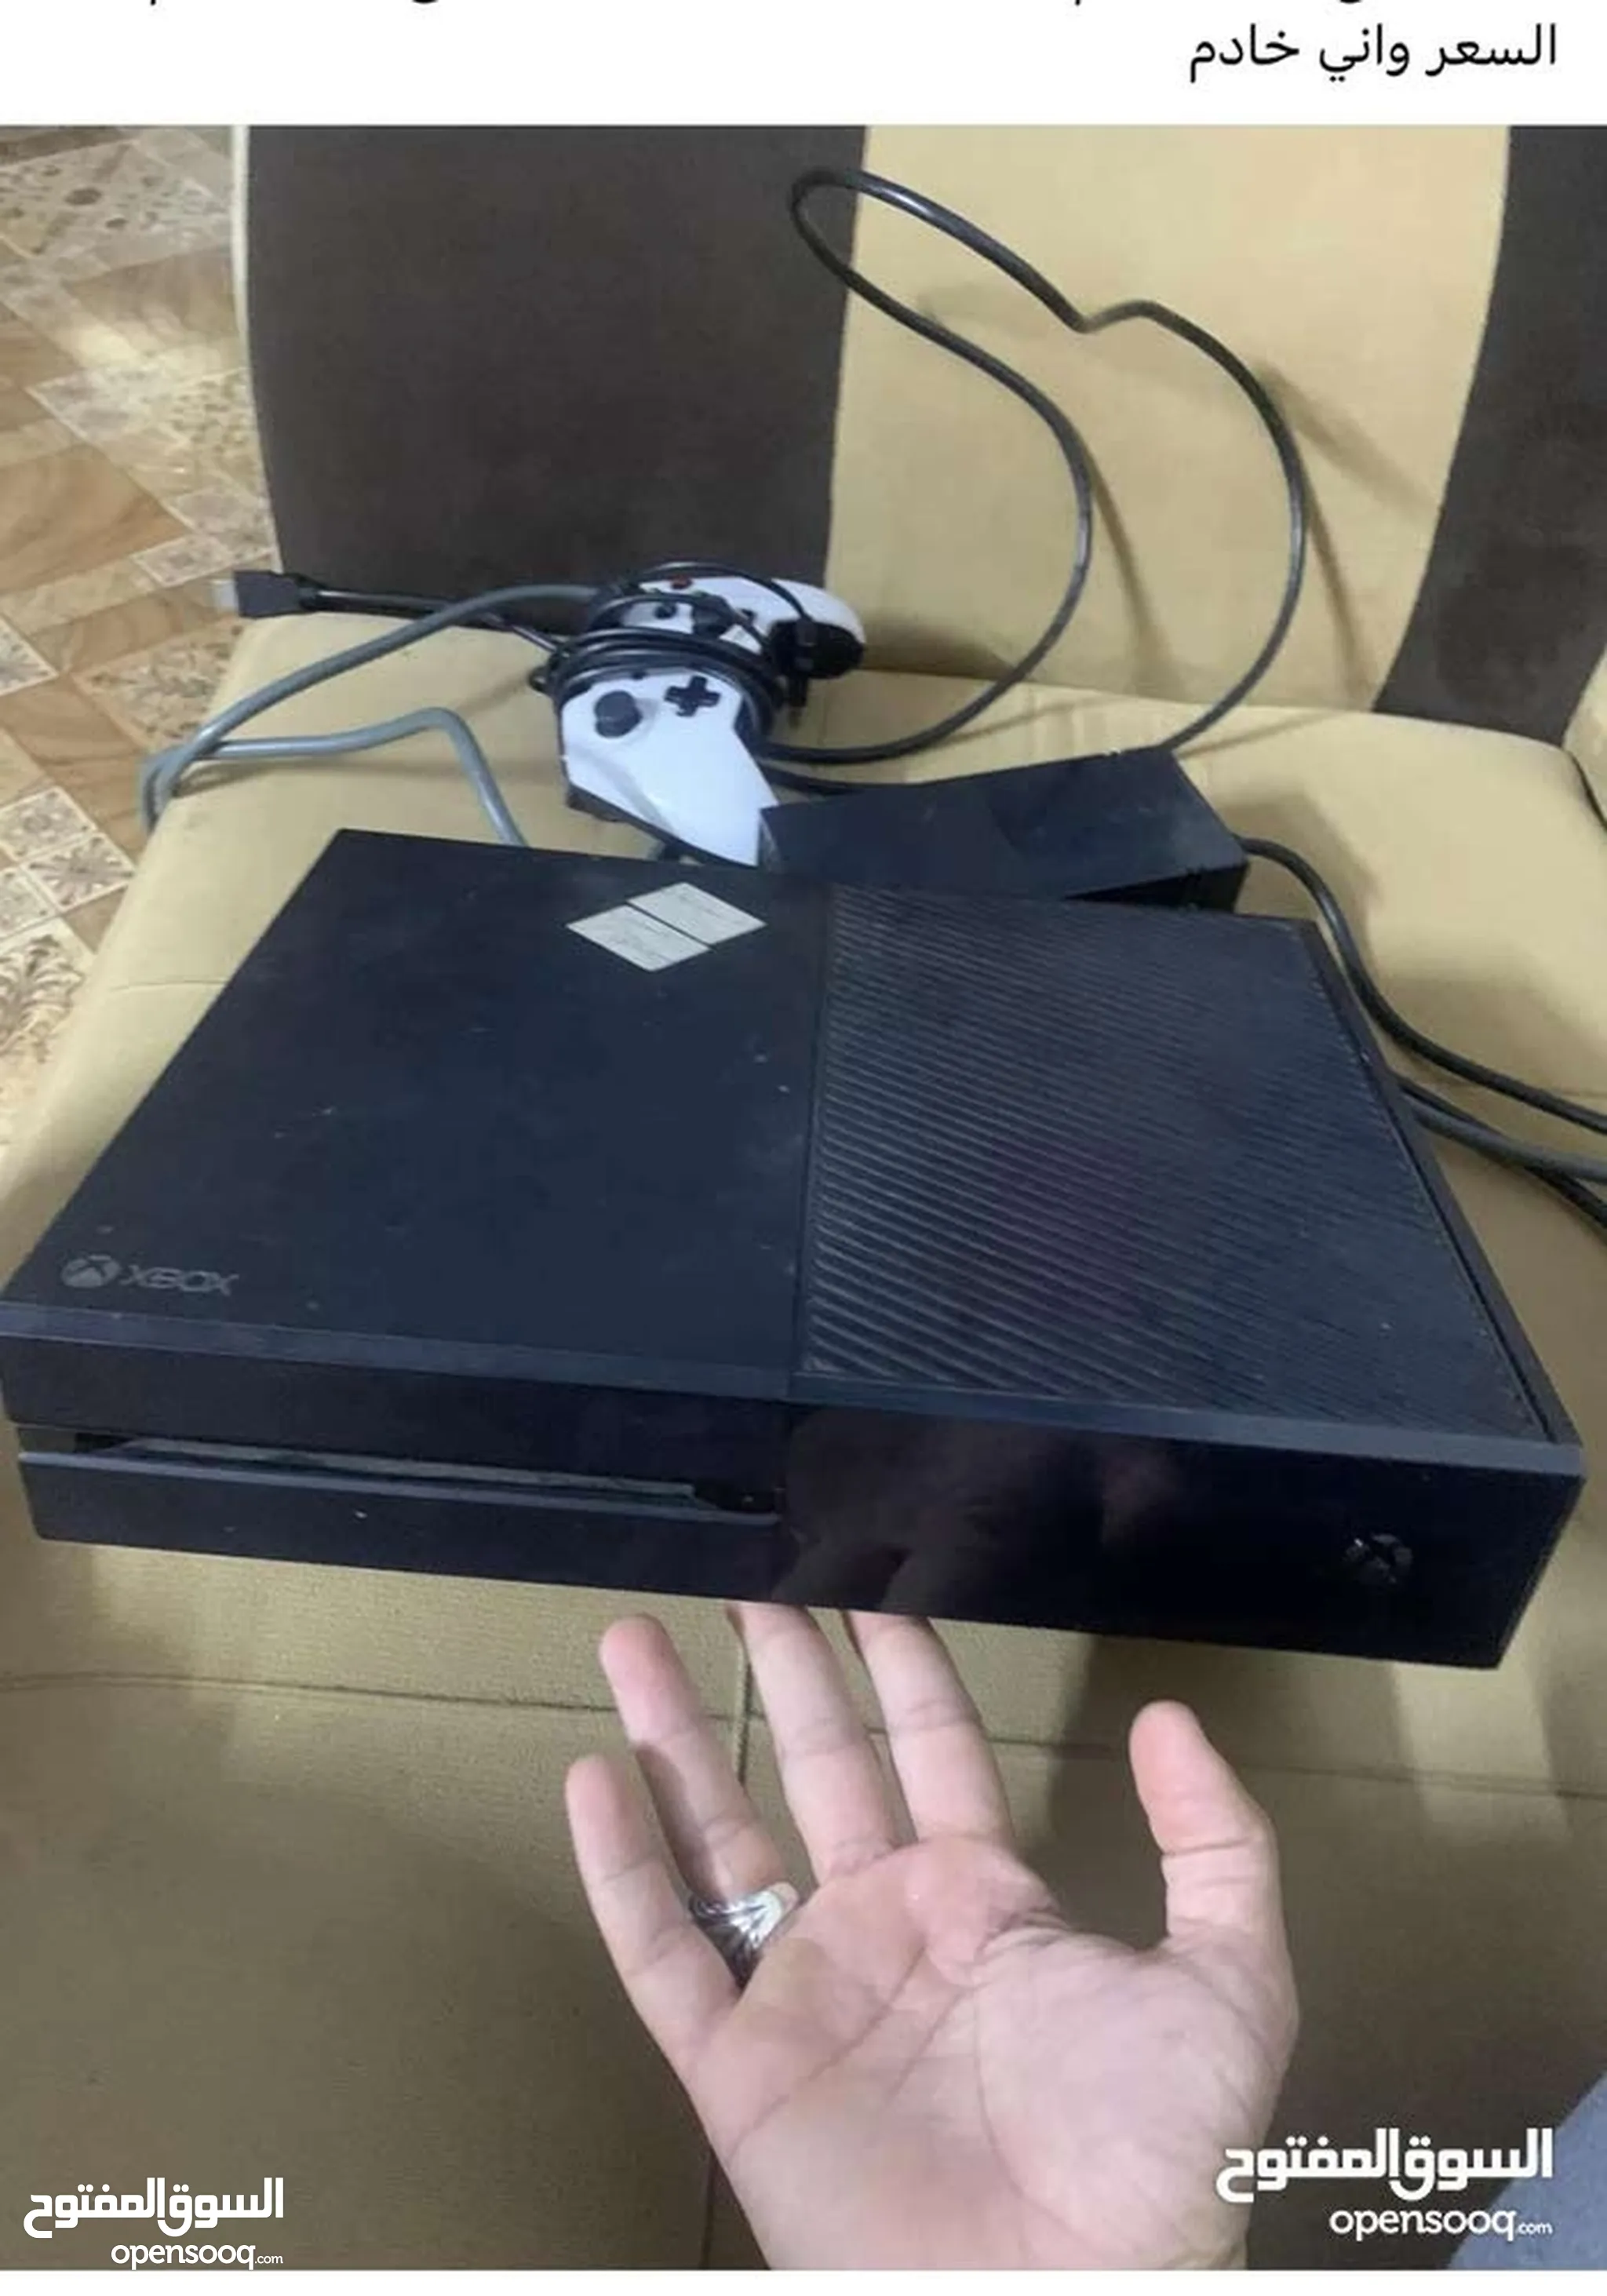 Xbox One For Sale in Basra : Used : Best Prices | OpenSooq